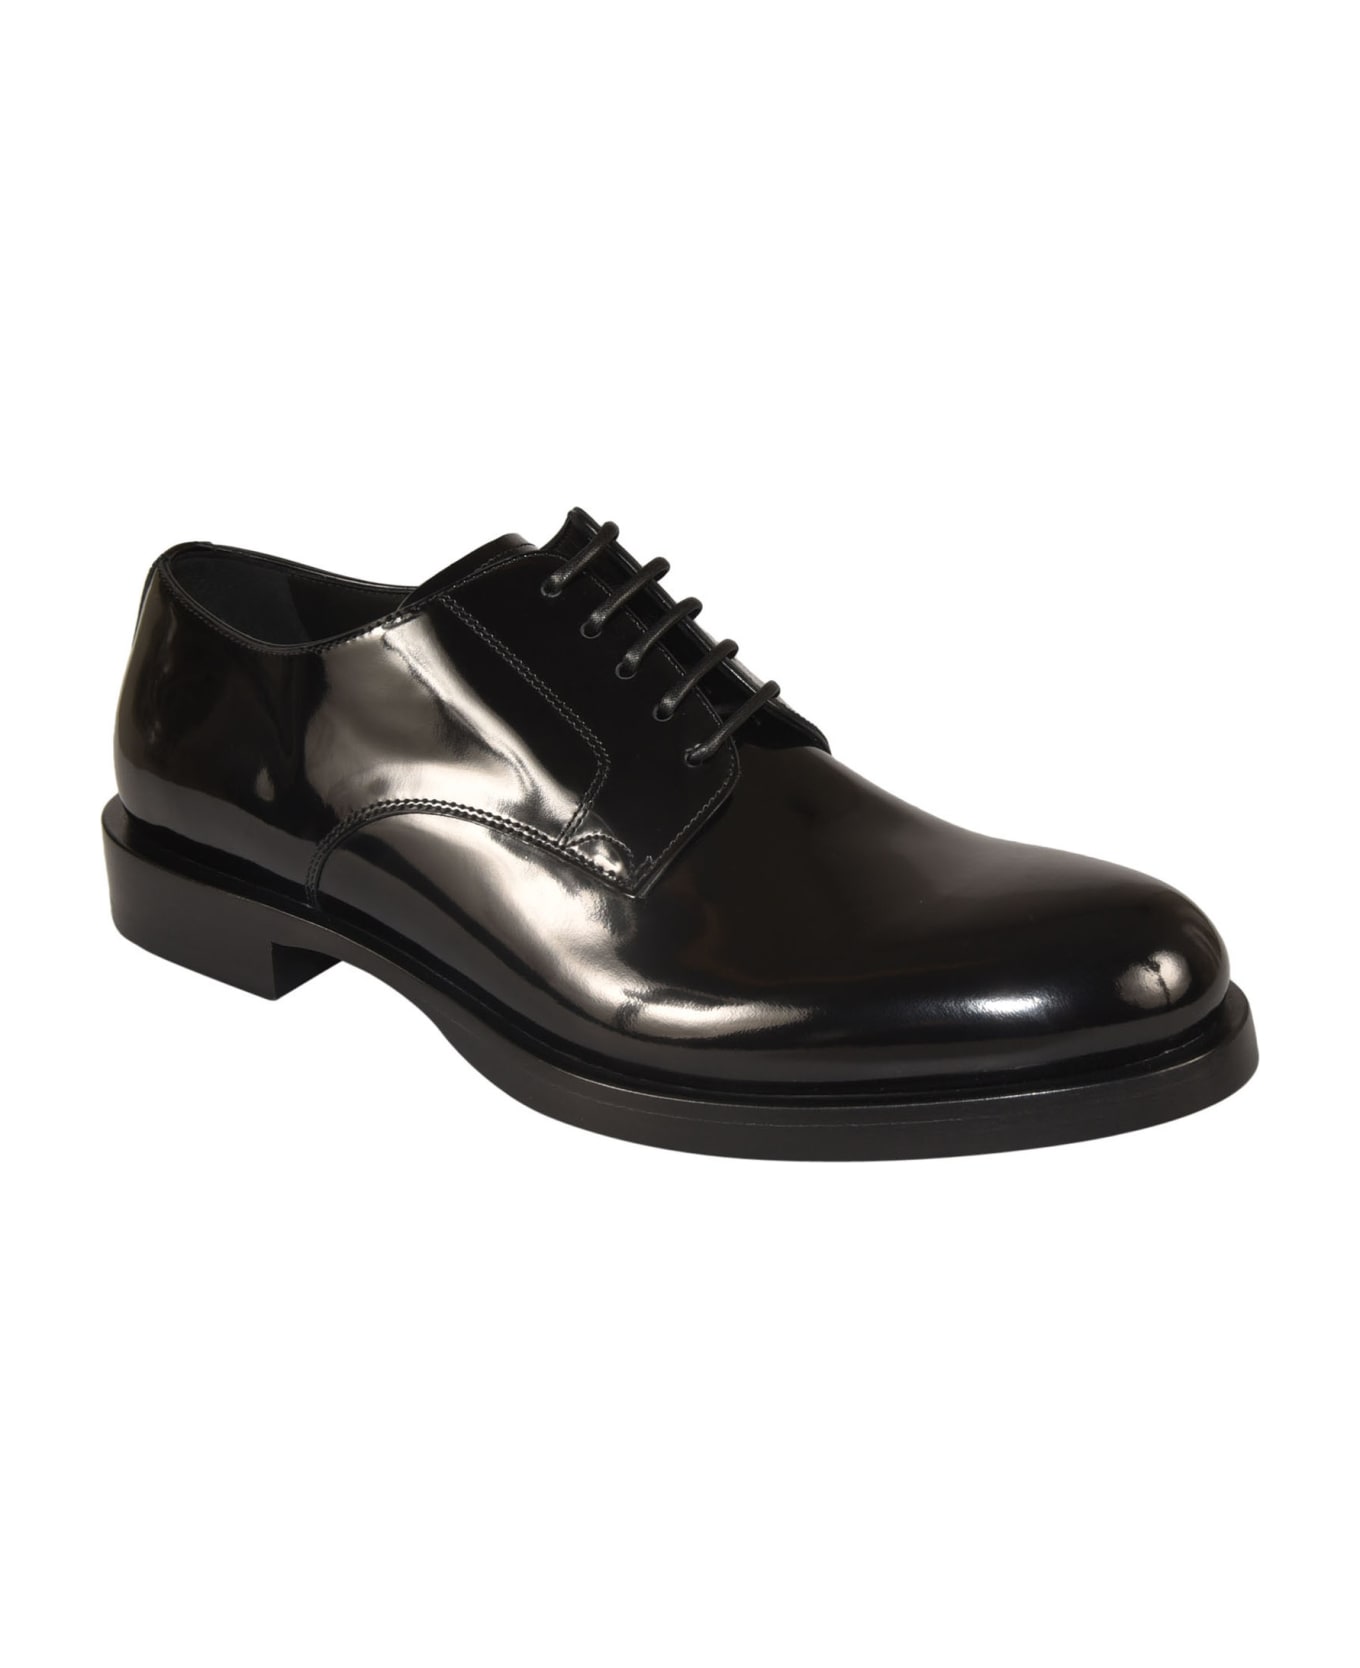 Dolce & Gabbana Classic Lace-up Derby Shoes - Black